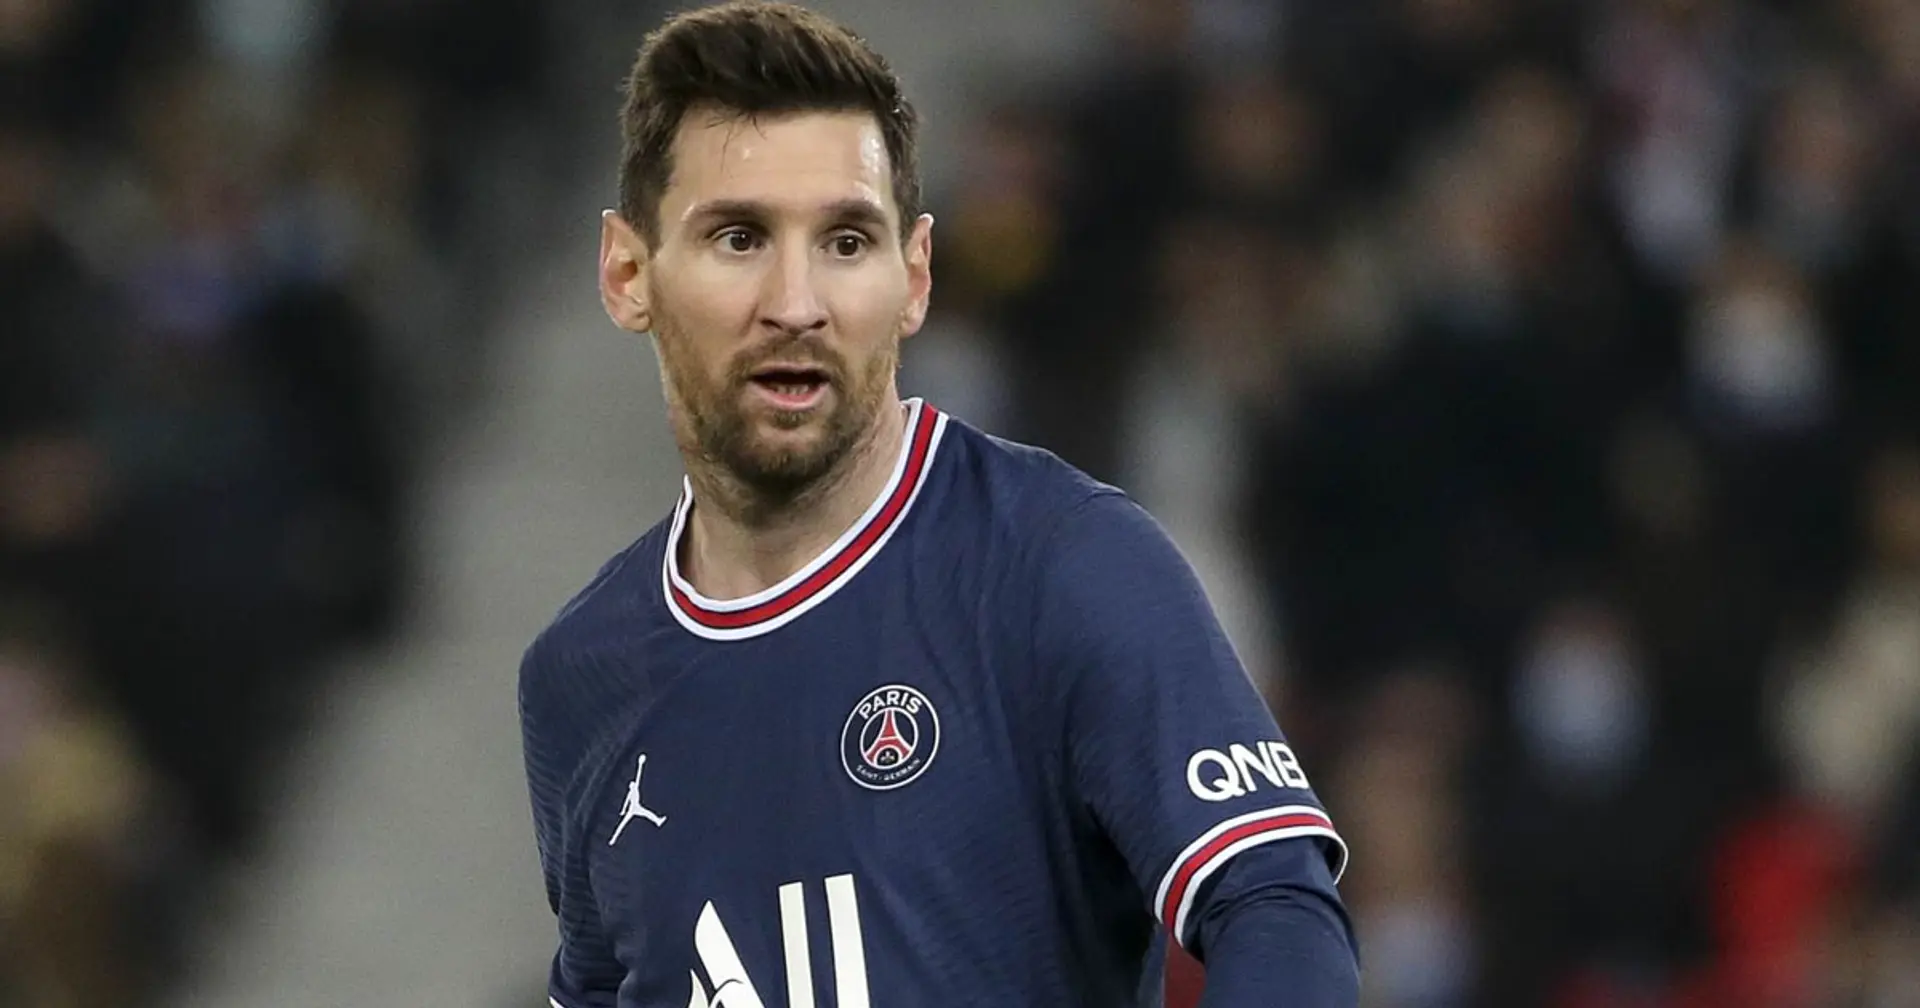 Leo Messi reaches unmatched assist feat after PSG's loss to Nantes